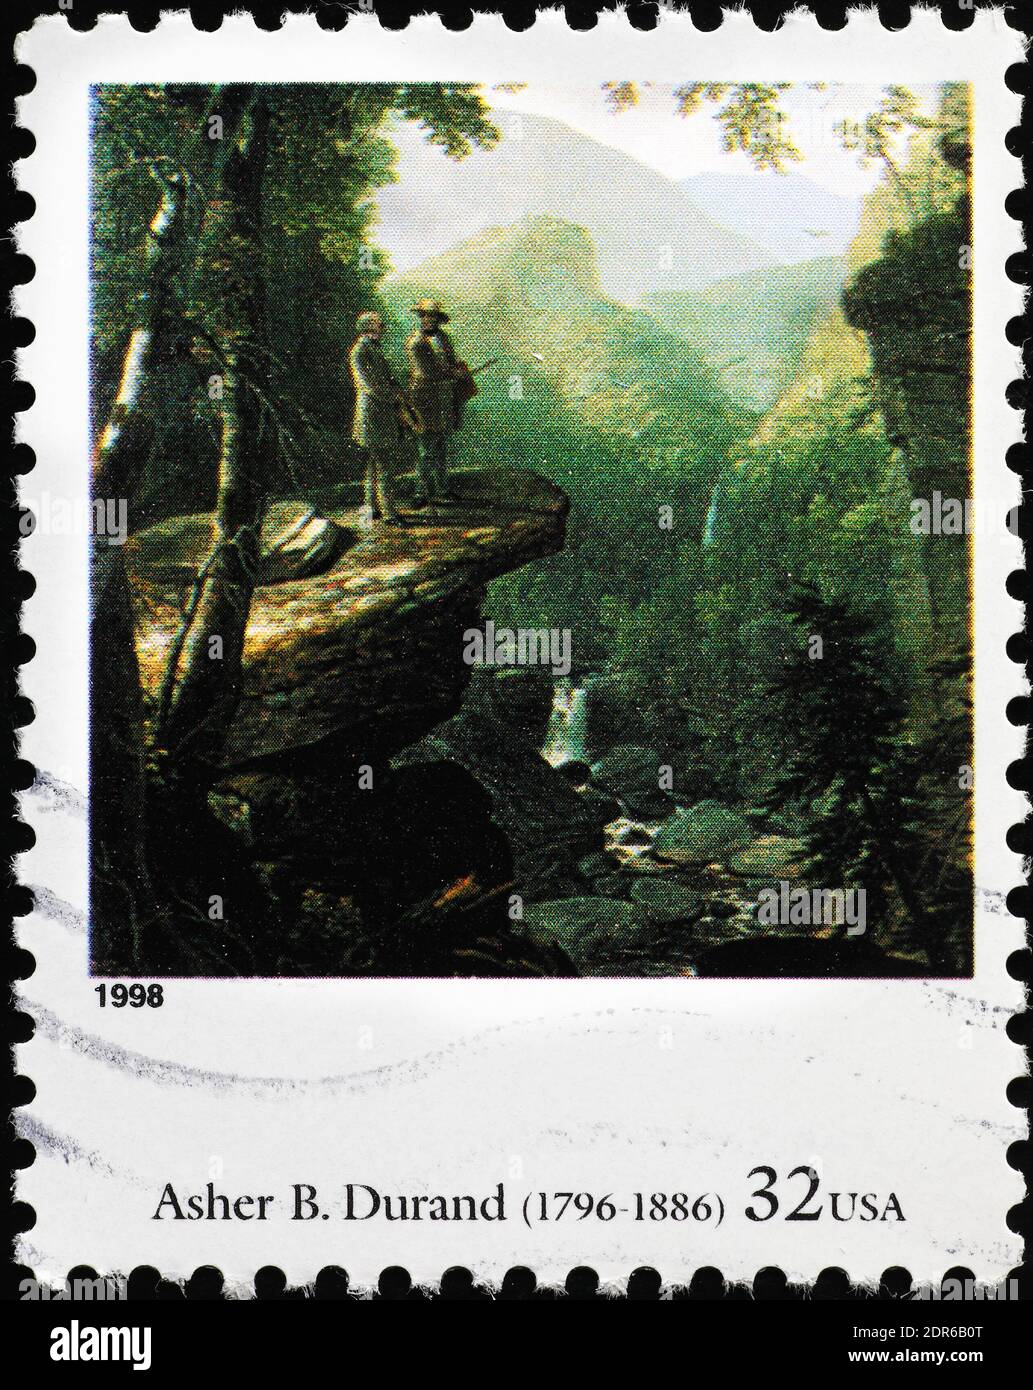 Kindred Spirits by Asher Brown Durand on american stamp Stock Photo